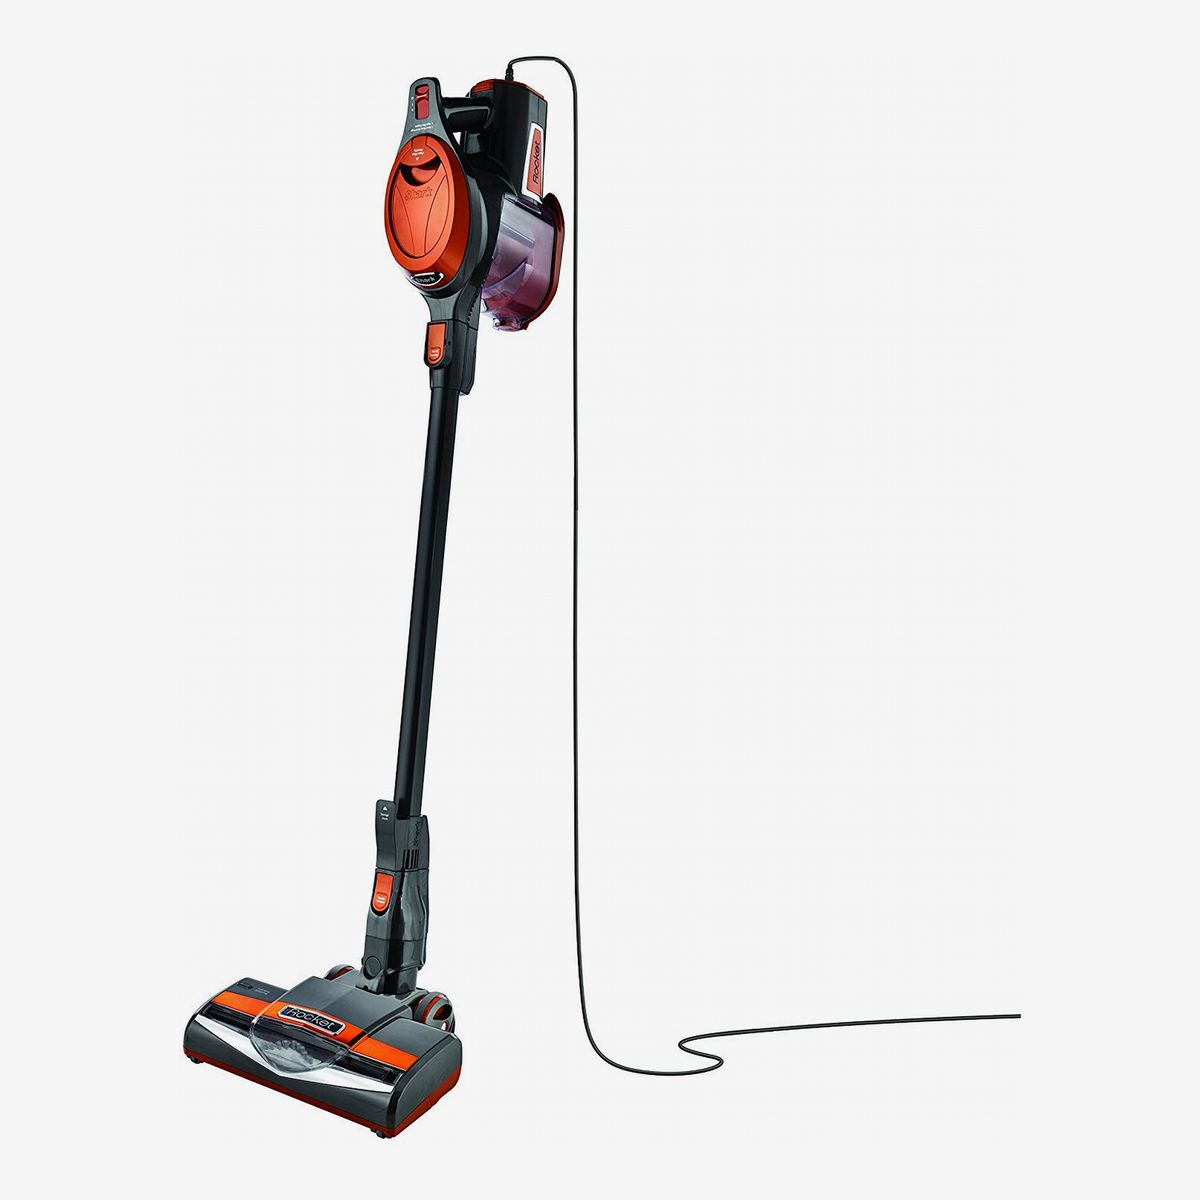 18 Best Vacuums For Pet Hair 2021 The, Best Small Vacuum For Hardwood Floors And Pet Hair